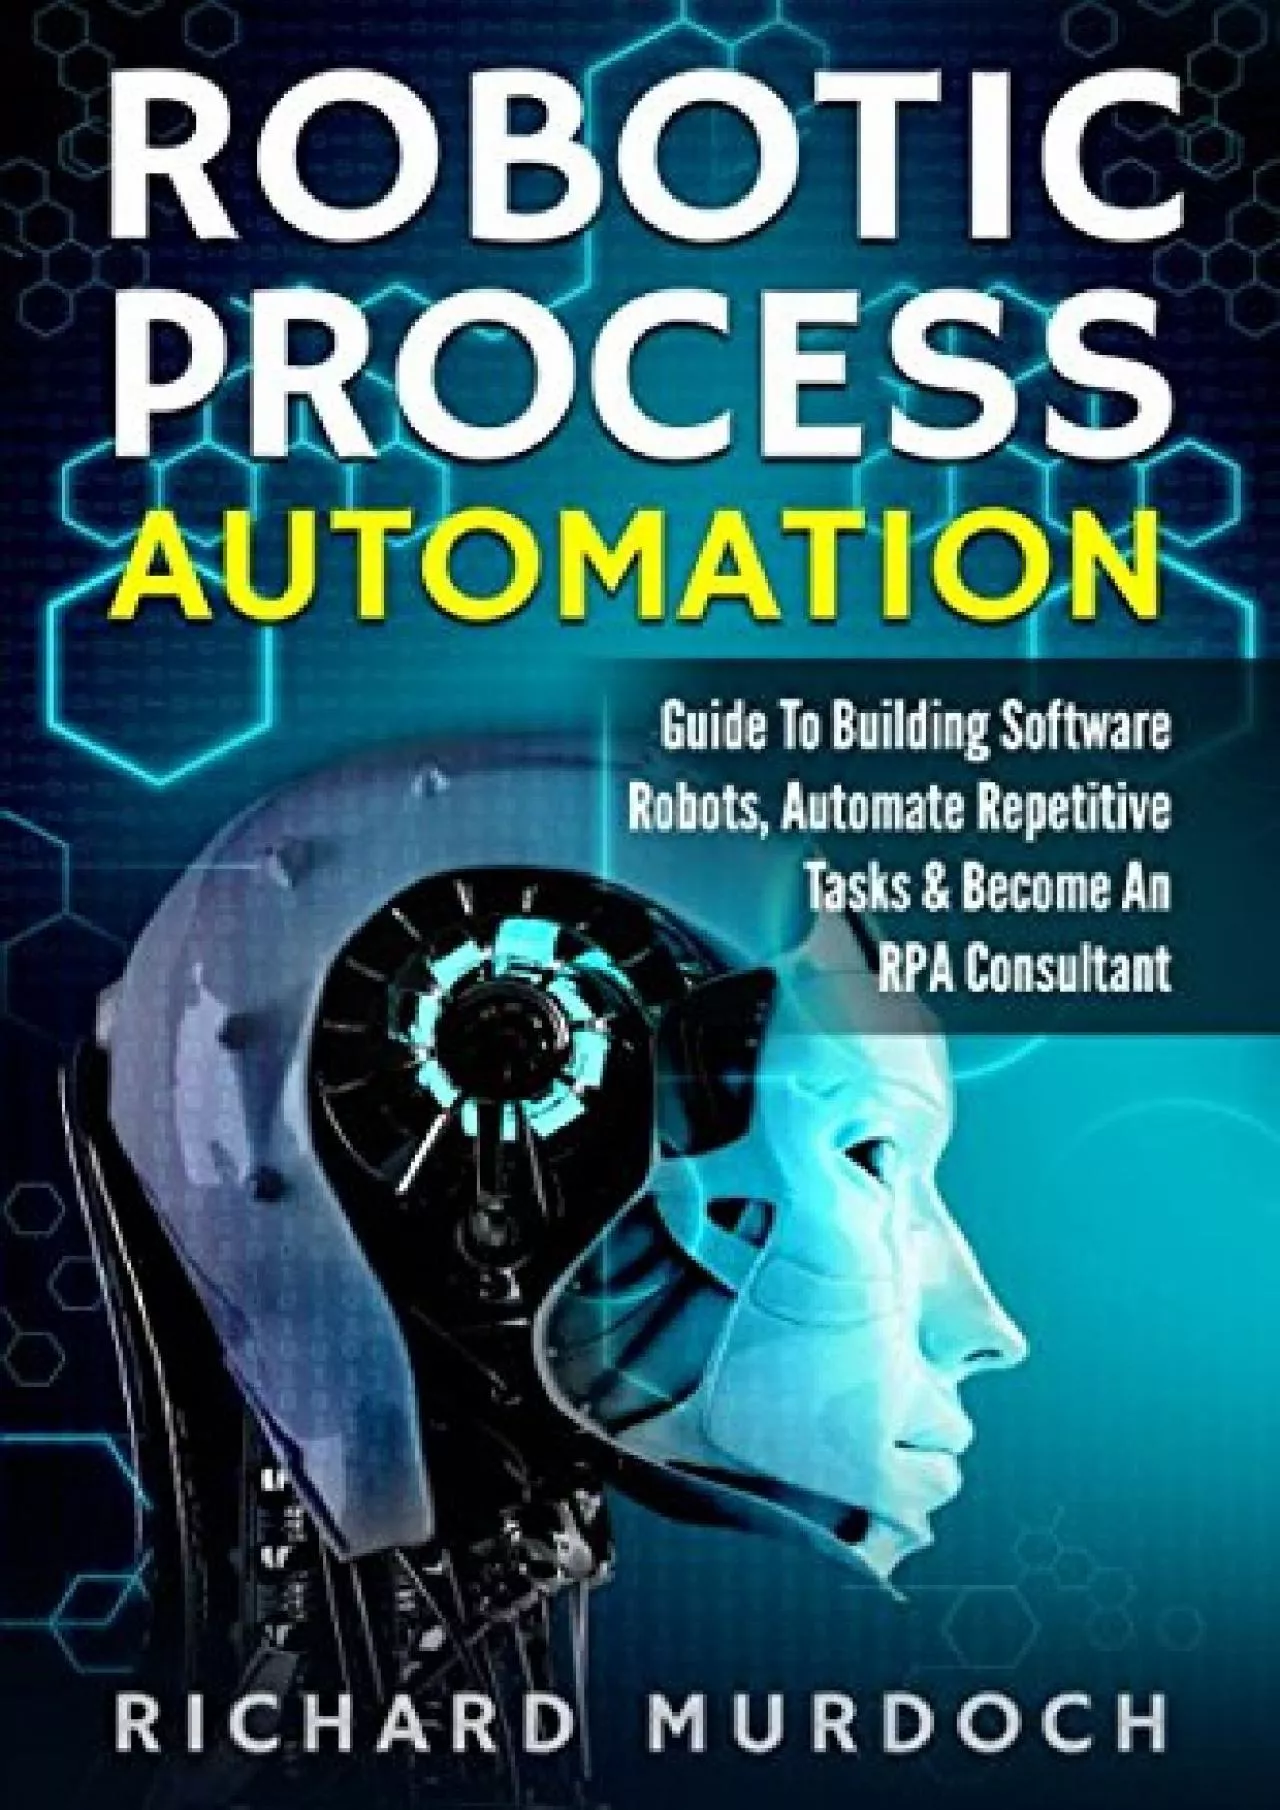 Robotic Process Automation: Guide To Building Software Robots, Automate Repetitive Tasks